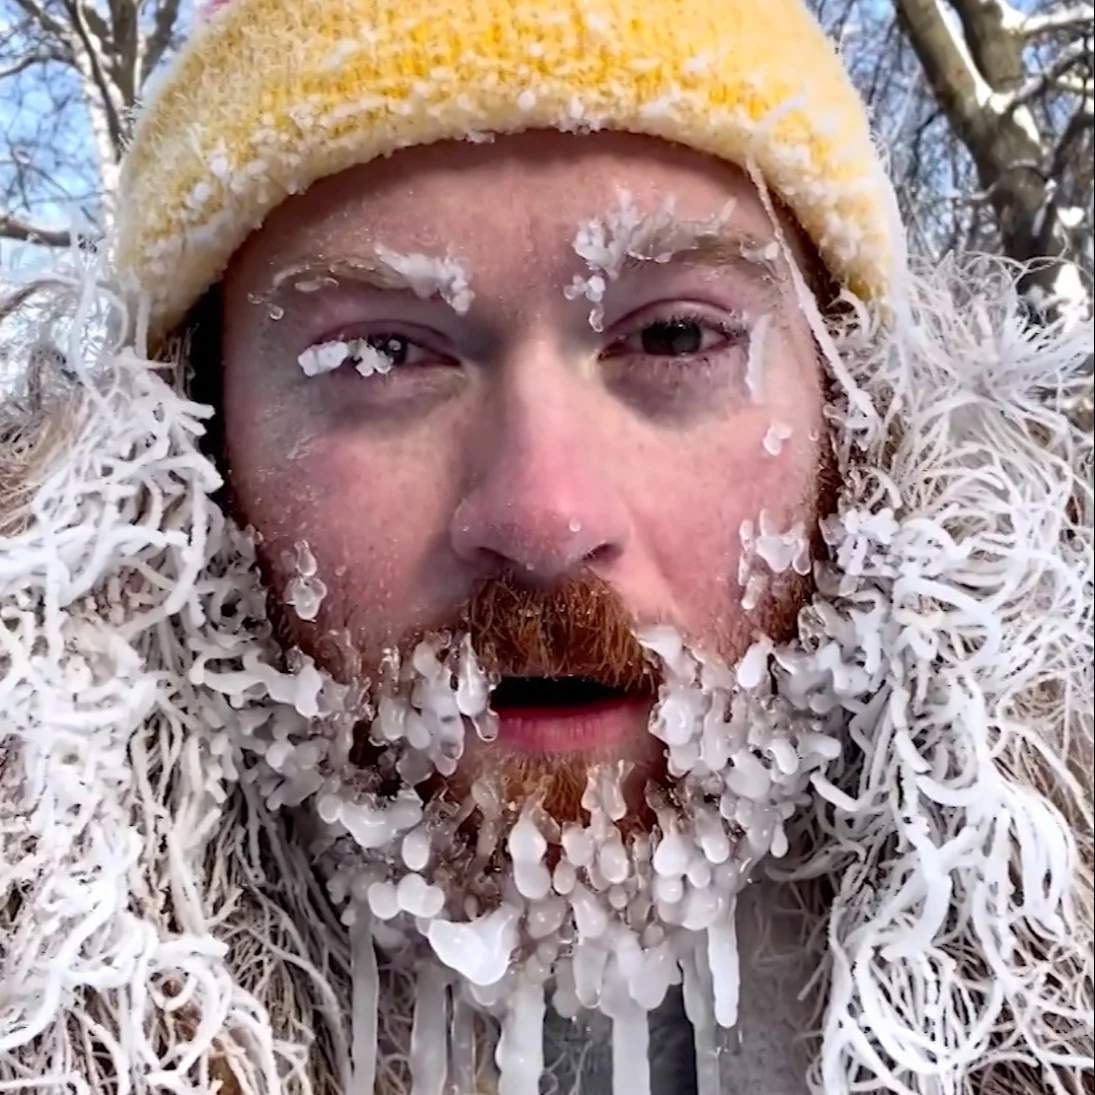 Minnesota man's claim to fame is his frozen beard and bowl of ramen